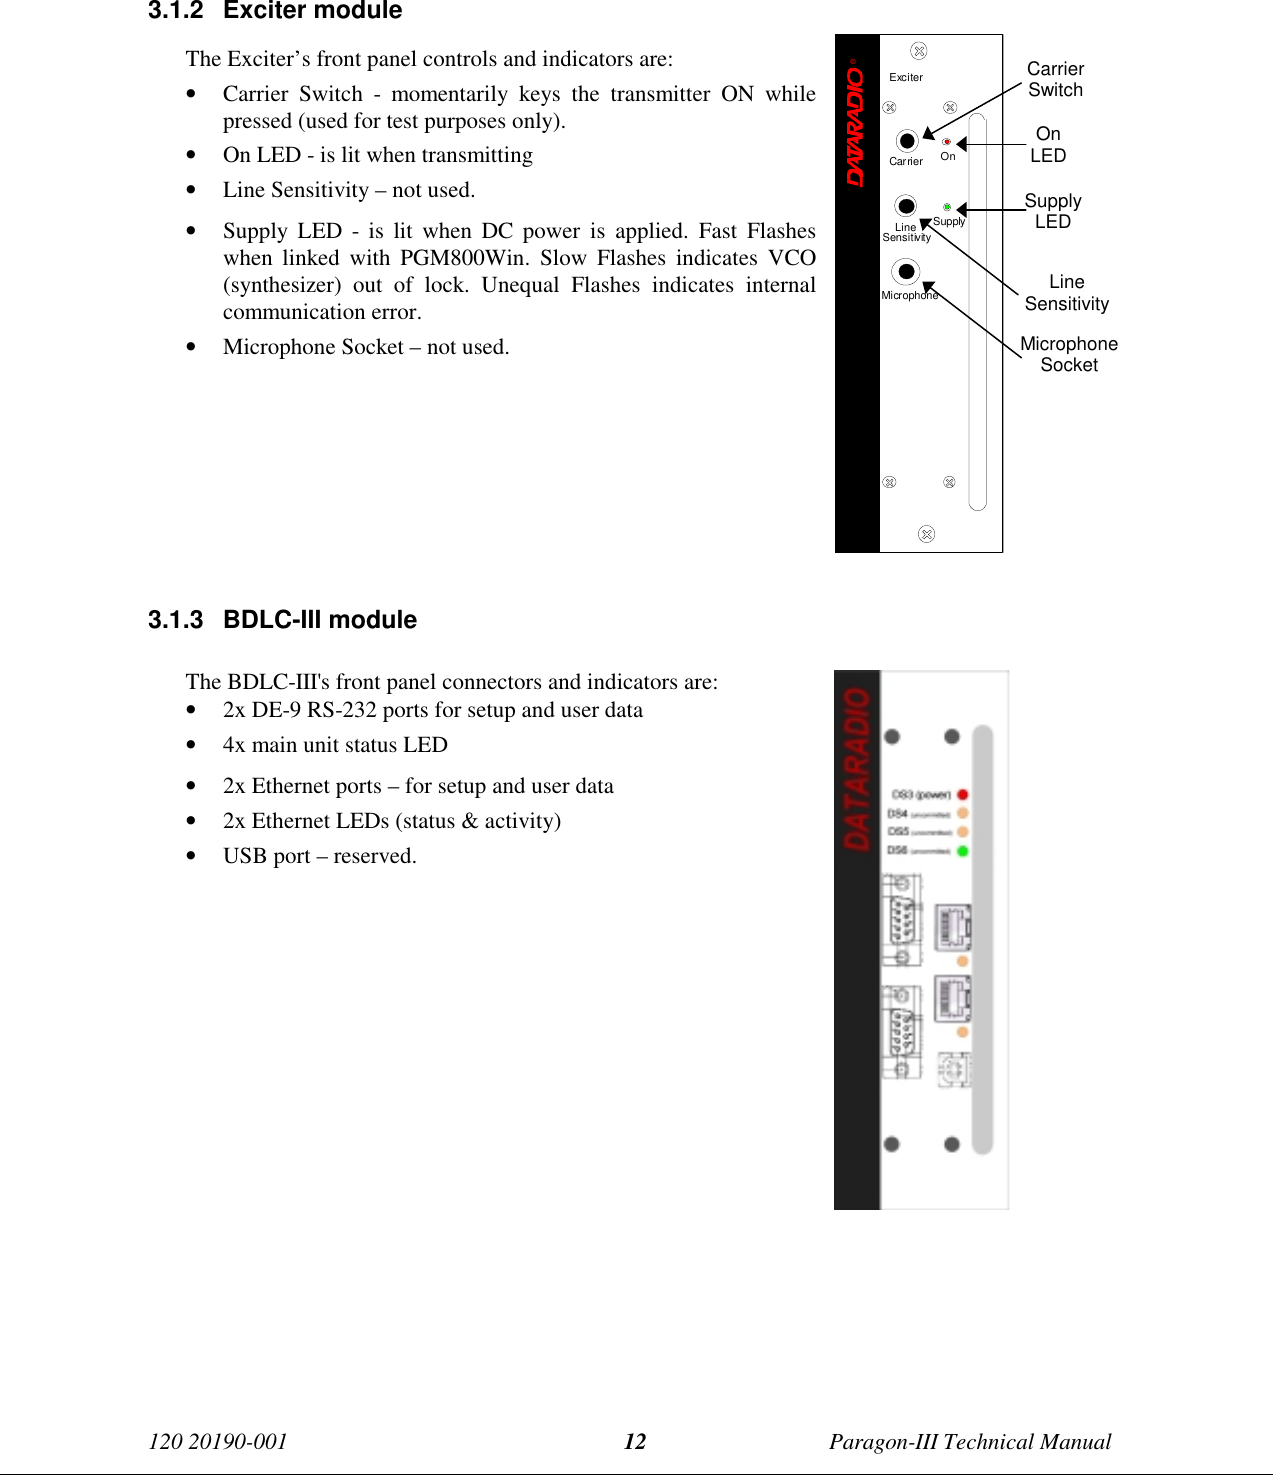 120 20190-001 Paragon-III Technical Manual123.1.2 Exciter moduleThe Exciter’s front panel controls and indicators are:• Carrier Switch - momentarily keys the transmitter ON whilepressed (used for test purposes only).• On LED - is lit when transmitting• Line Sensitivity – not used.• Supply LED - is lit when DC power is applied. Fast Flasheswhen linked with PGM800Win. Slow Flashes indicates VCO(synthesizer) out of lock. Unequal Flashes indicates internalcommunication error.• Microphone Socket – not used.3.1.3 BDLC-III moduleThe BDLC-III&apos;s front panel connectors and indicators are:• 2x DE-9 RS-232 ports for setup and user data• 4x main unit status LED• 2x Ethernet ports – for setup and user data• 2x Ethernet LEDs (status &amp; activity)• USB port – reserved.CarrierSwitchOnLEDSupplyLEDLineSensitivityMicrophoneSocket®ExciterCarrier OnLineSensitivitySupplyMicrophone